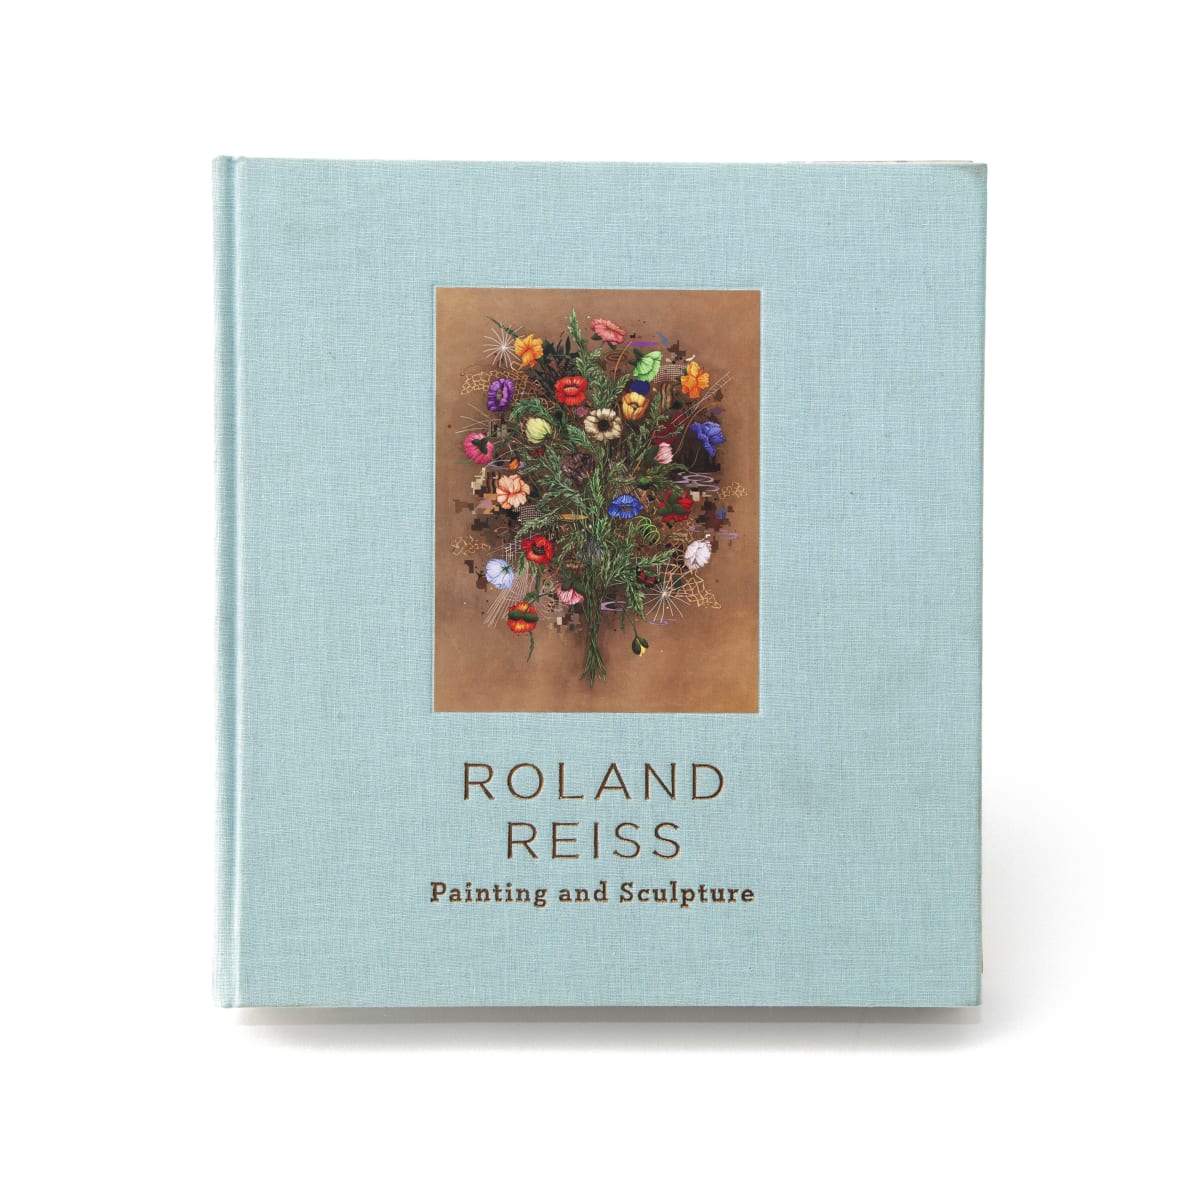 Roland Reiss: Painting and Sculpture